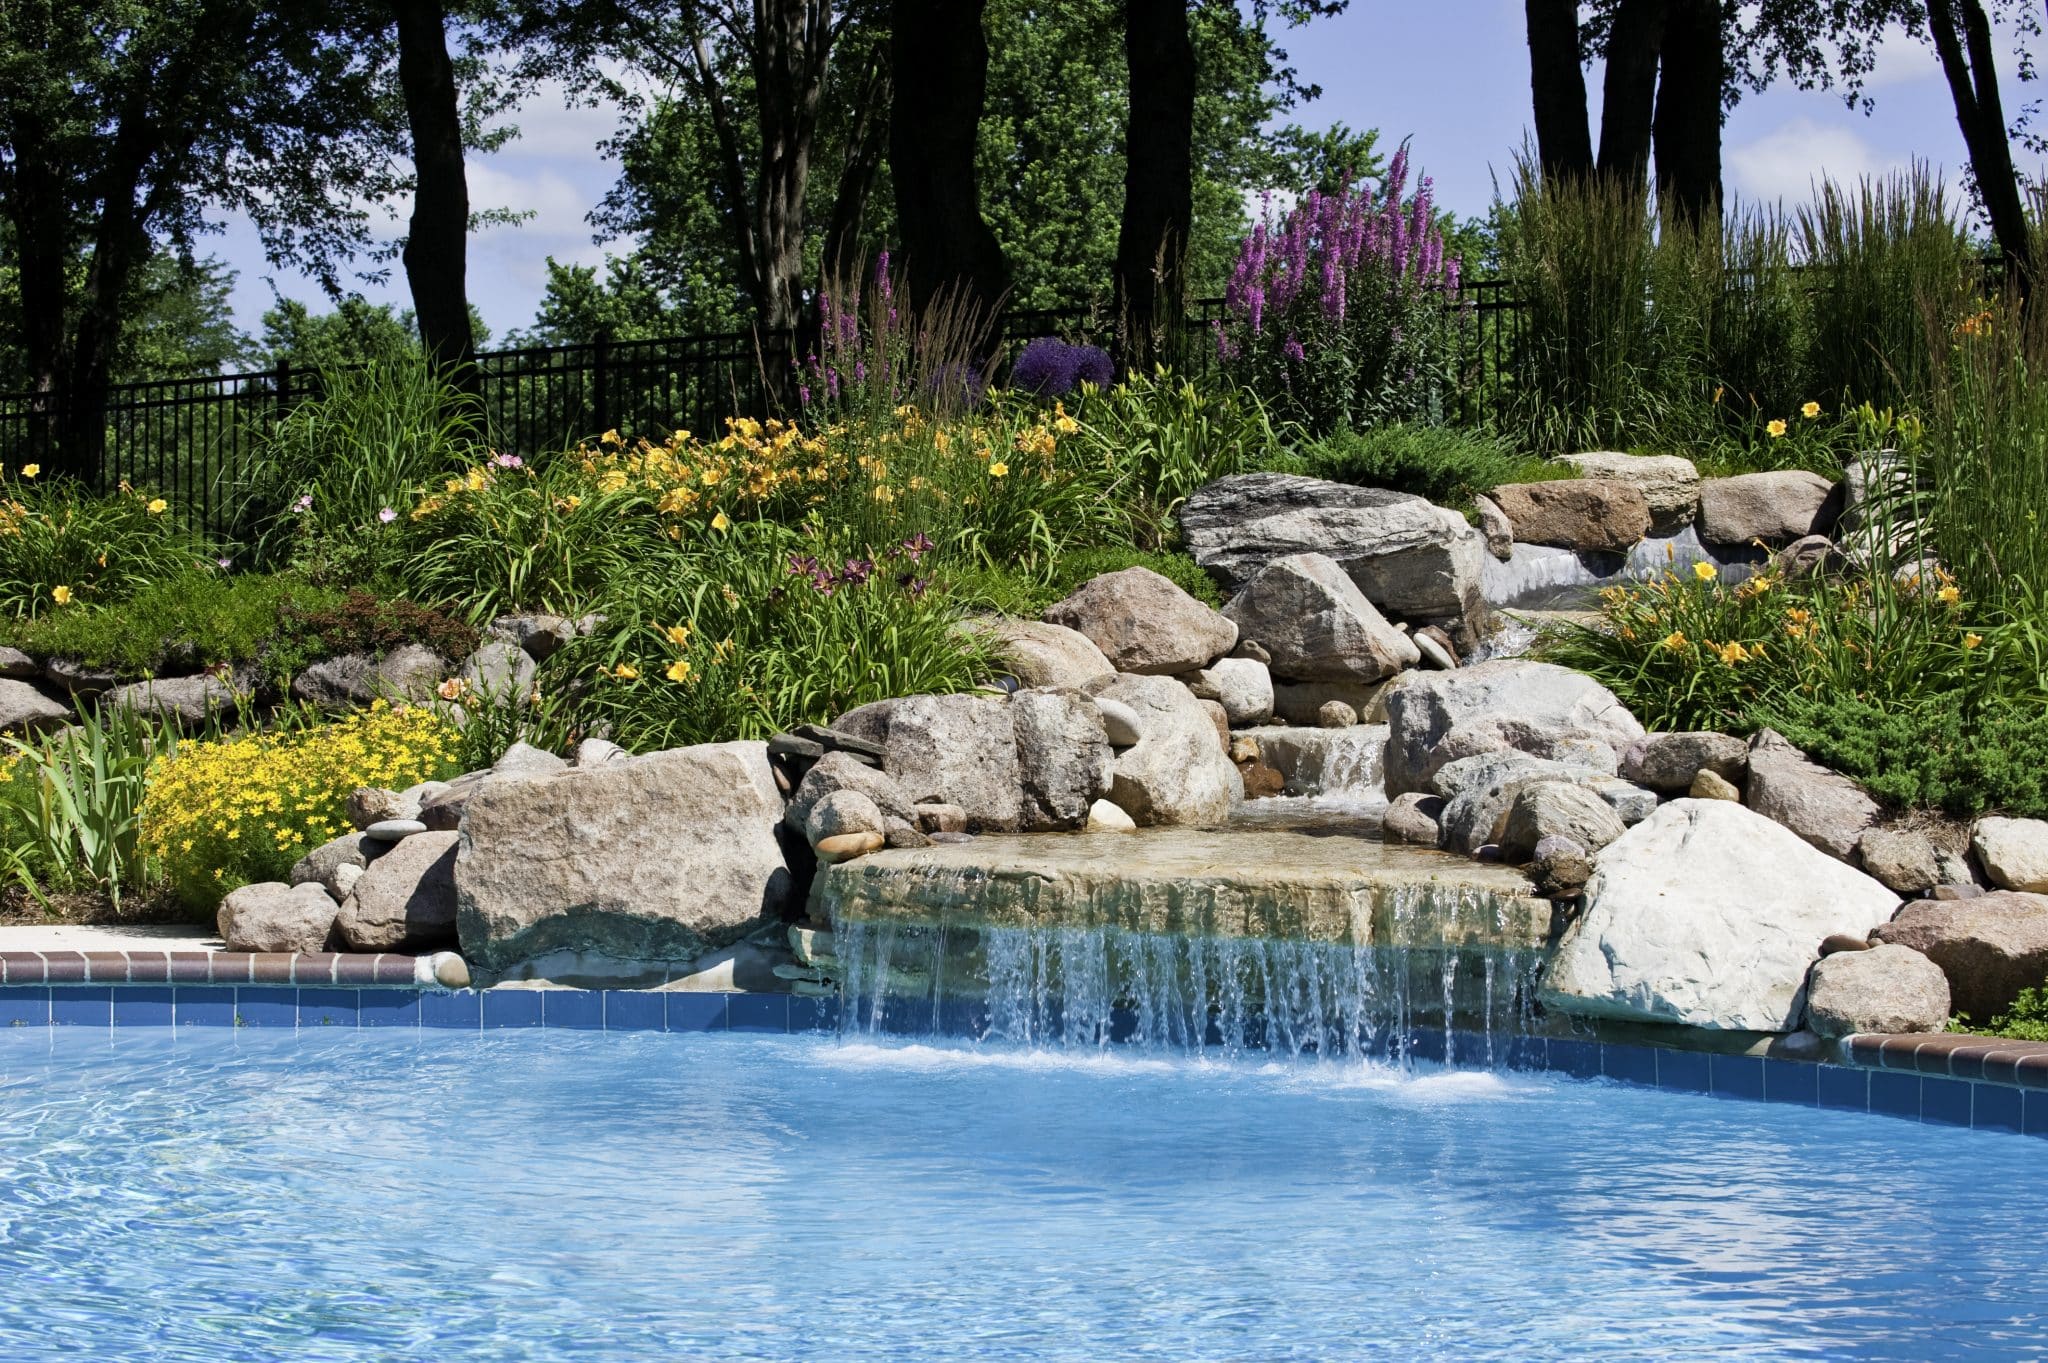 A garden surrounding a luxury pool provides privacy